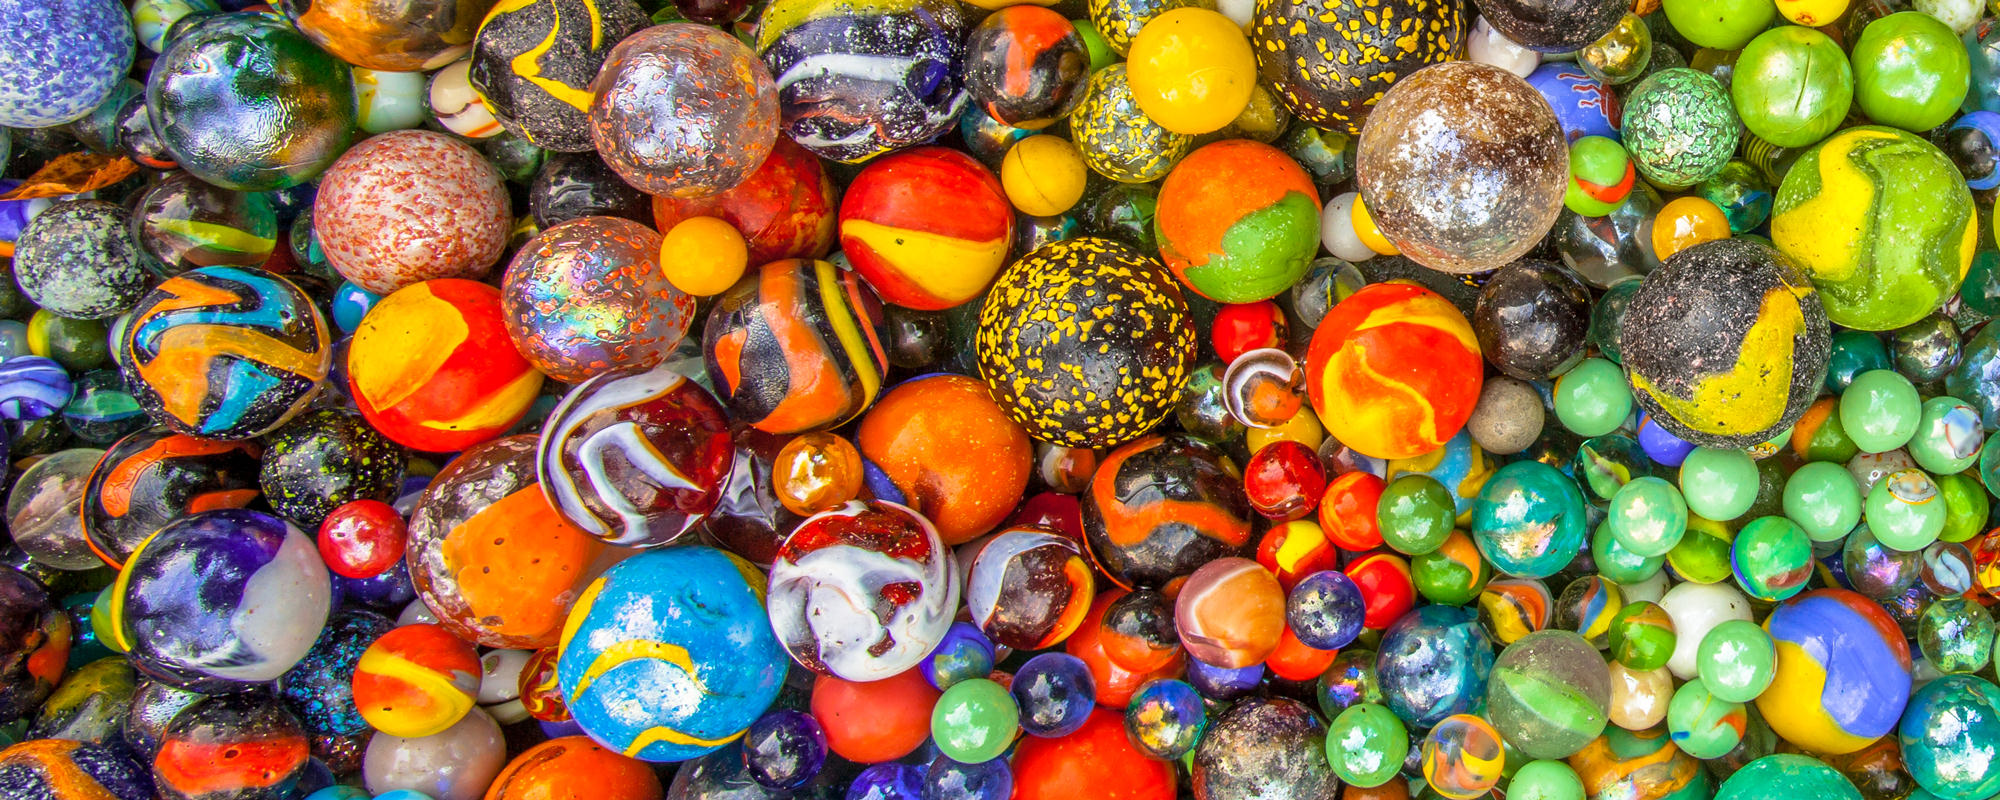 Different colored and sized marbles